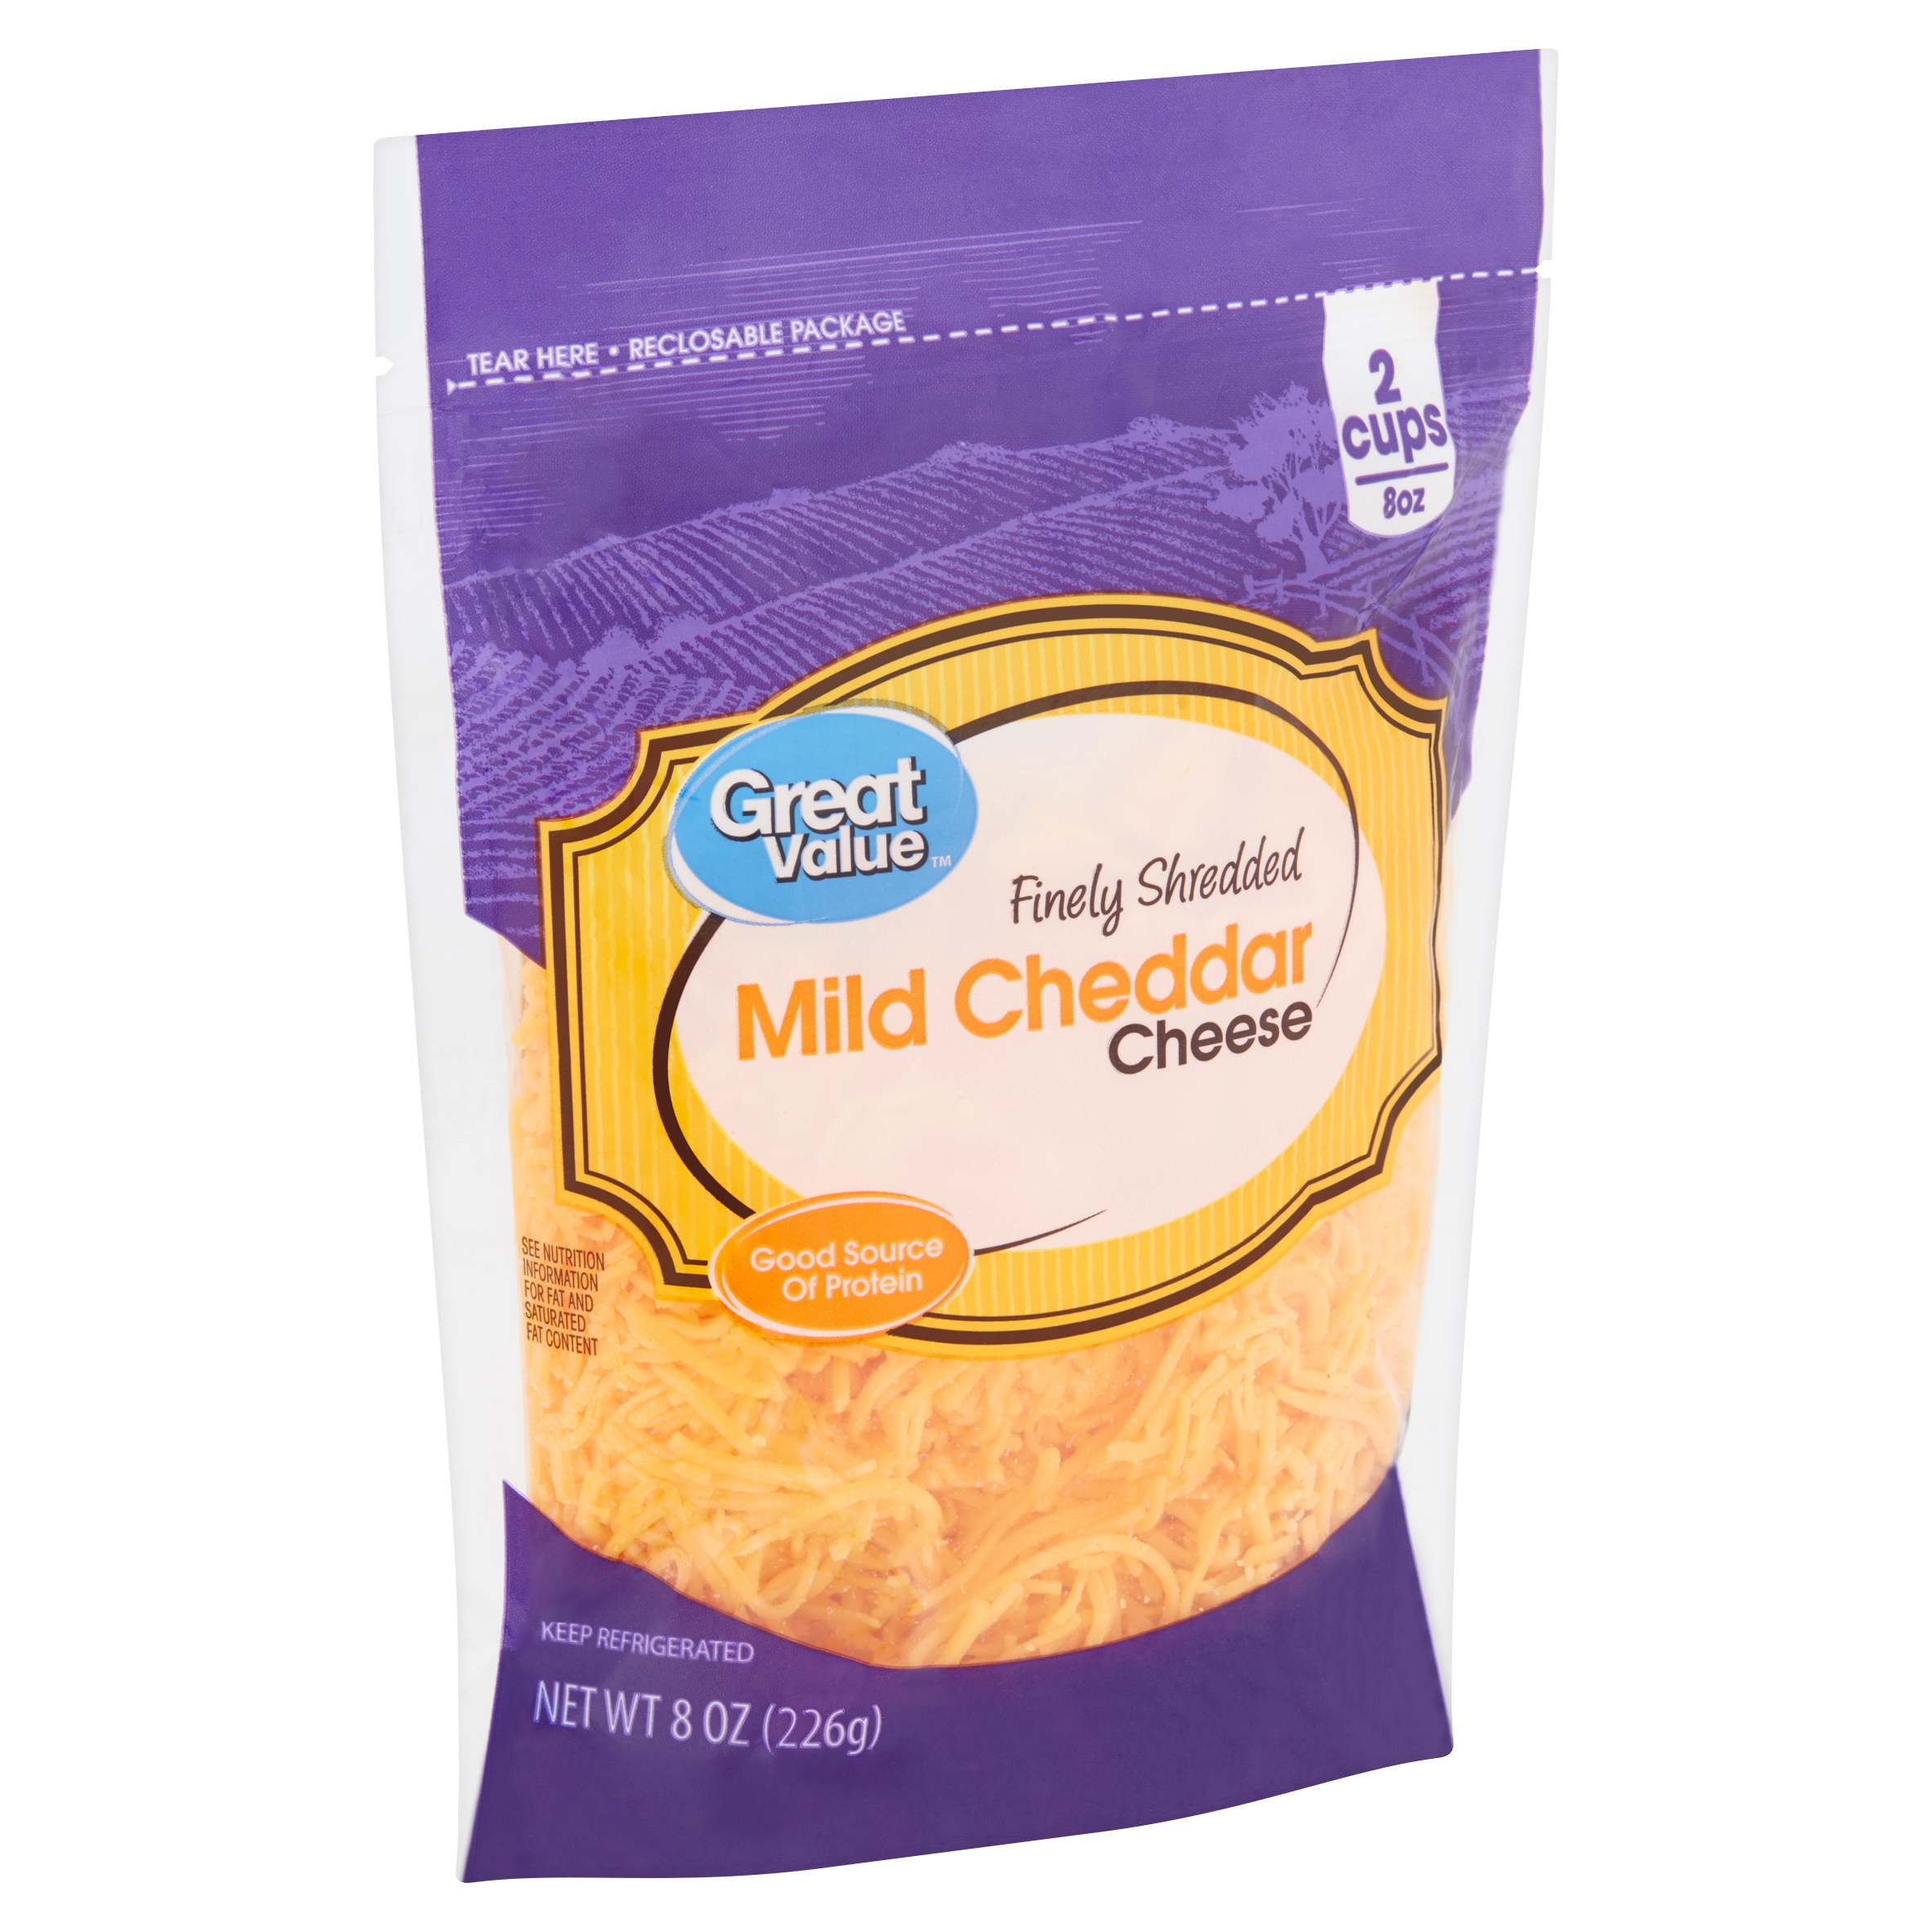 Great Value Finely Shredded Mild Cheddar Cheese, 8 Oz Image